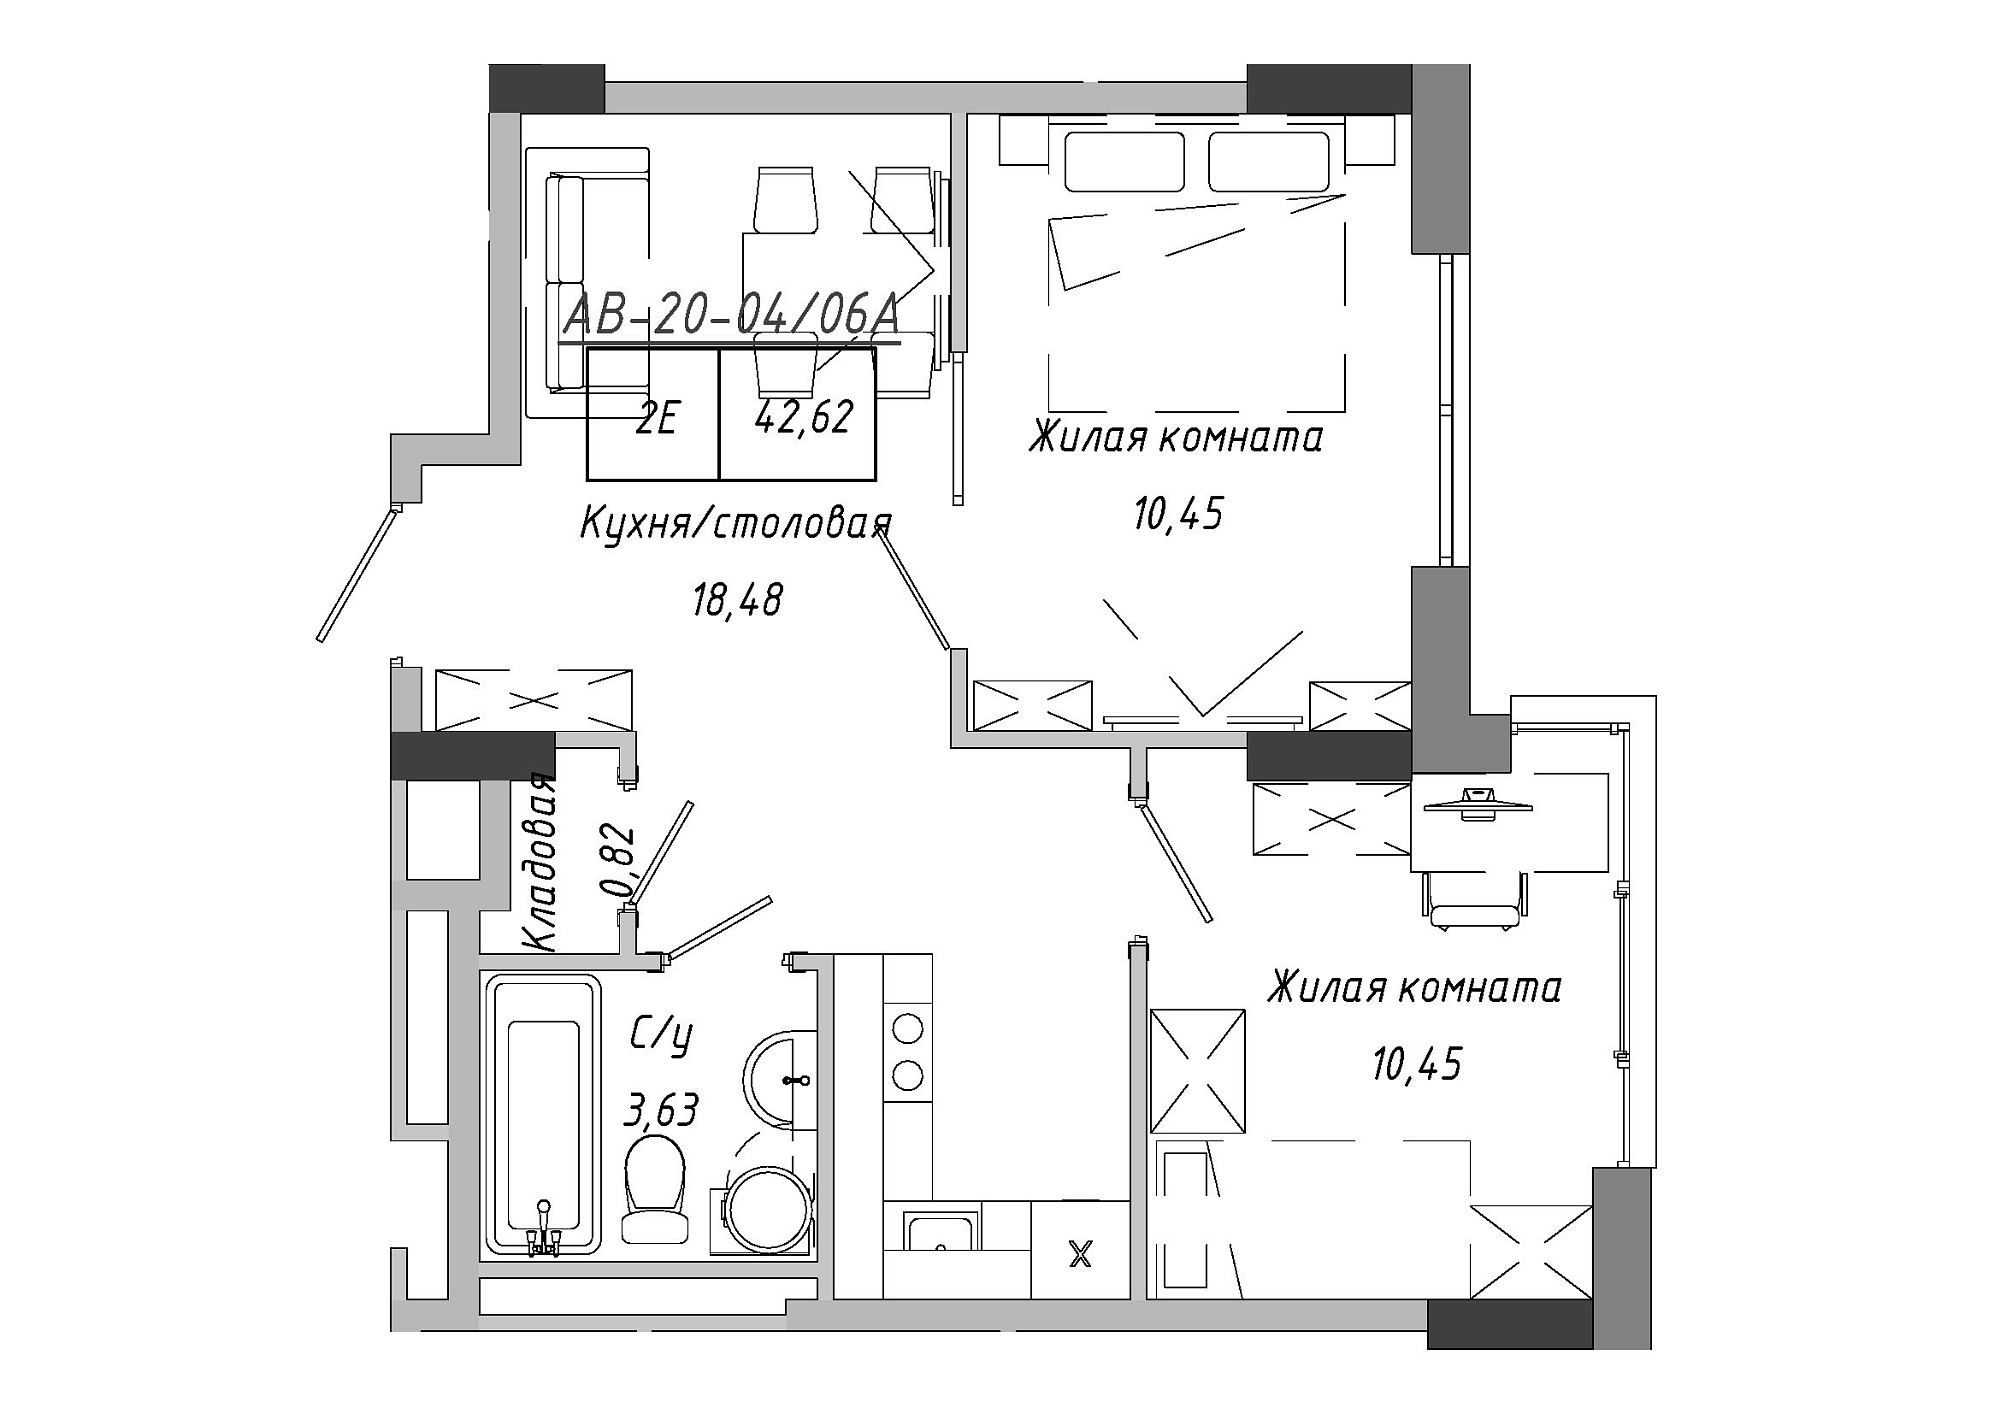 Planning 2-rm flats area 42.62m2, AB-20-04/0006а.